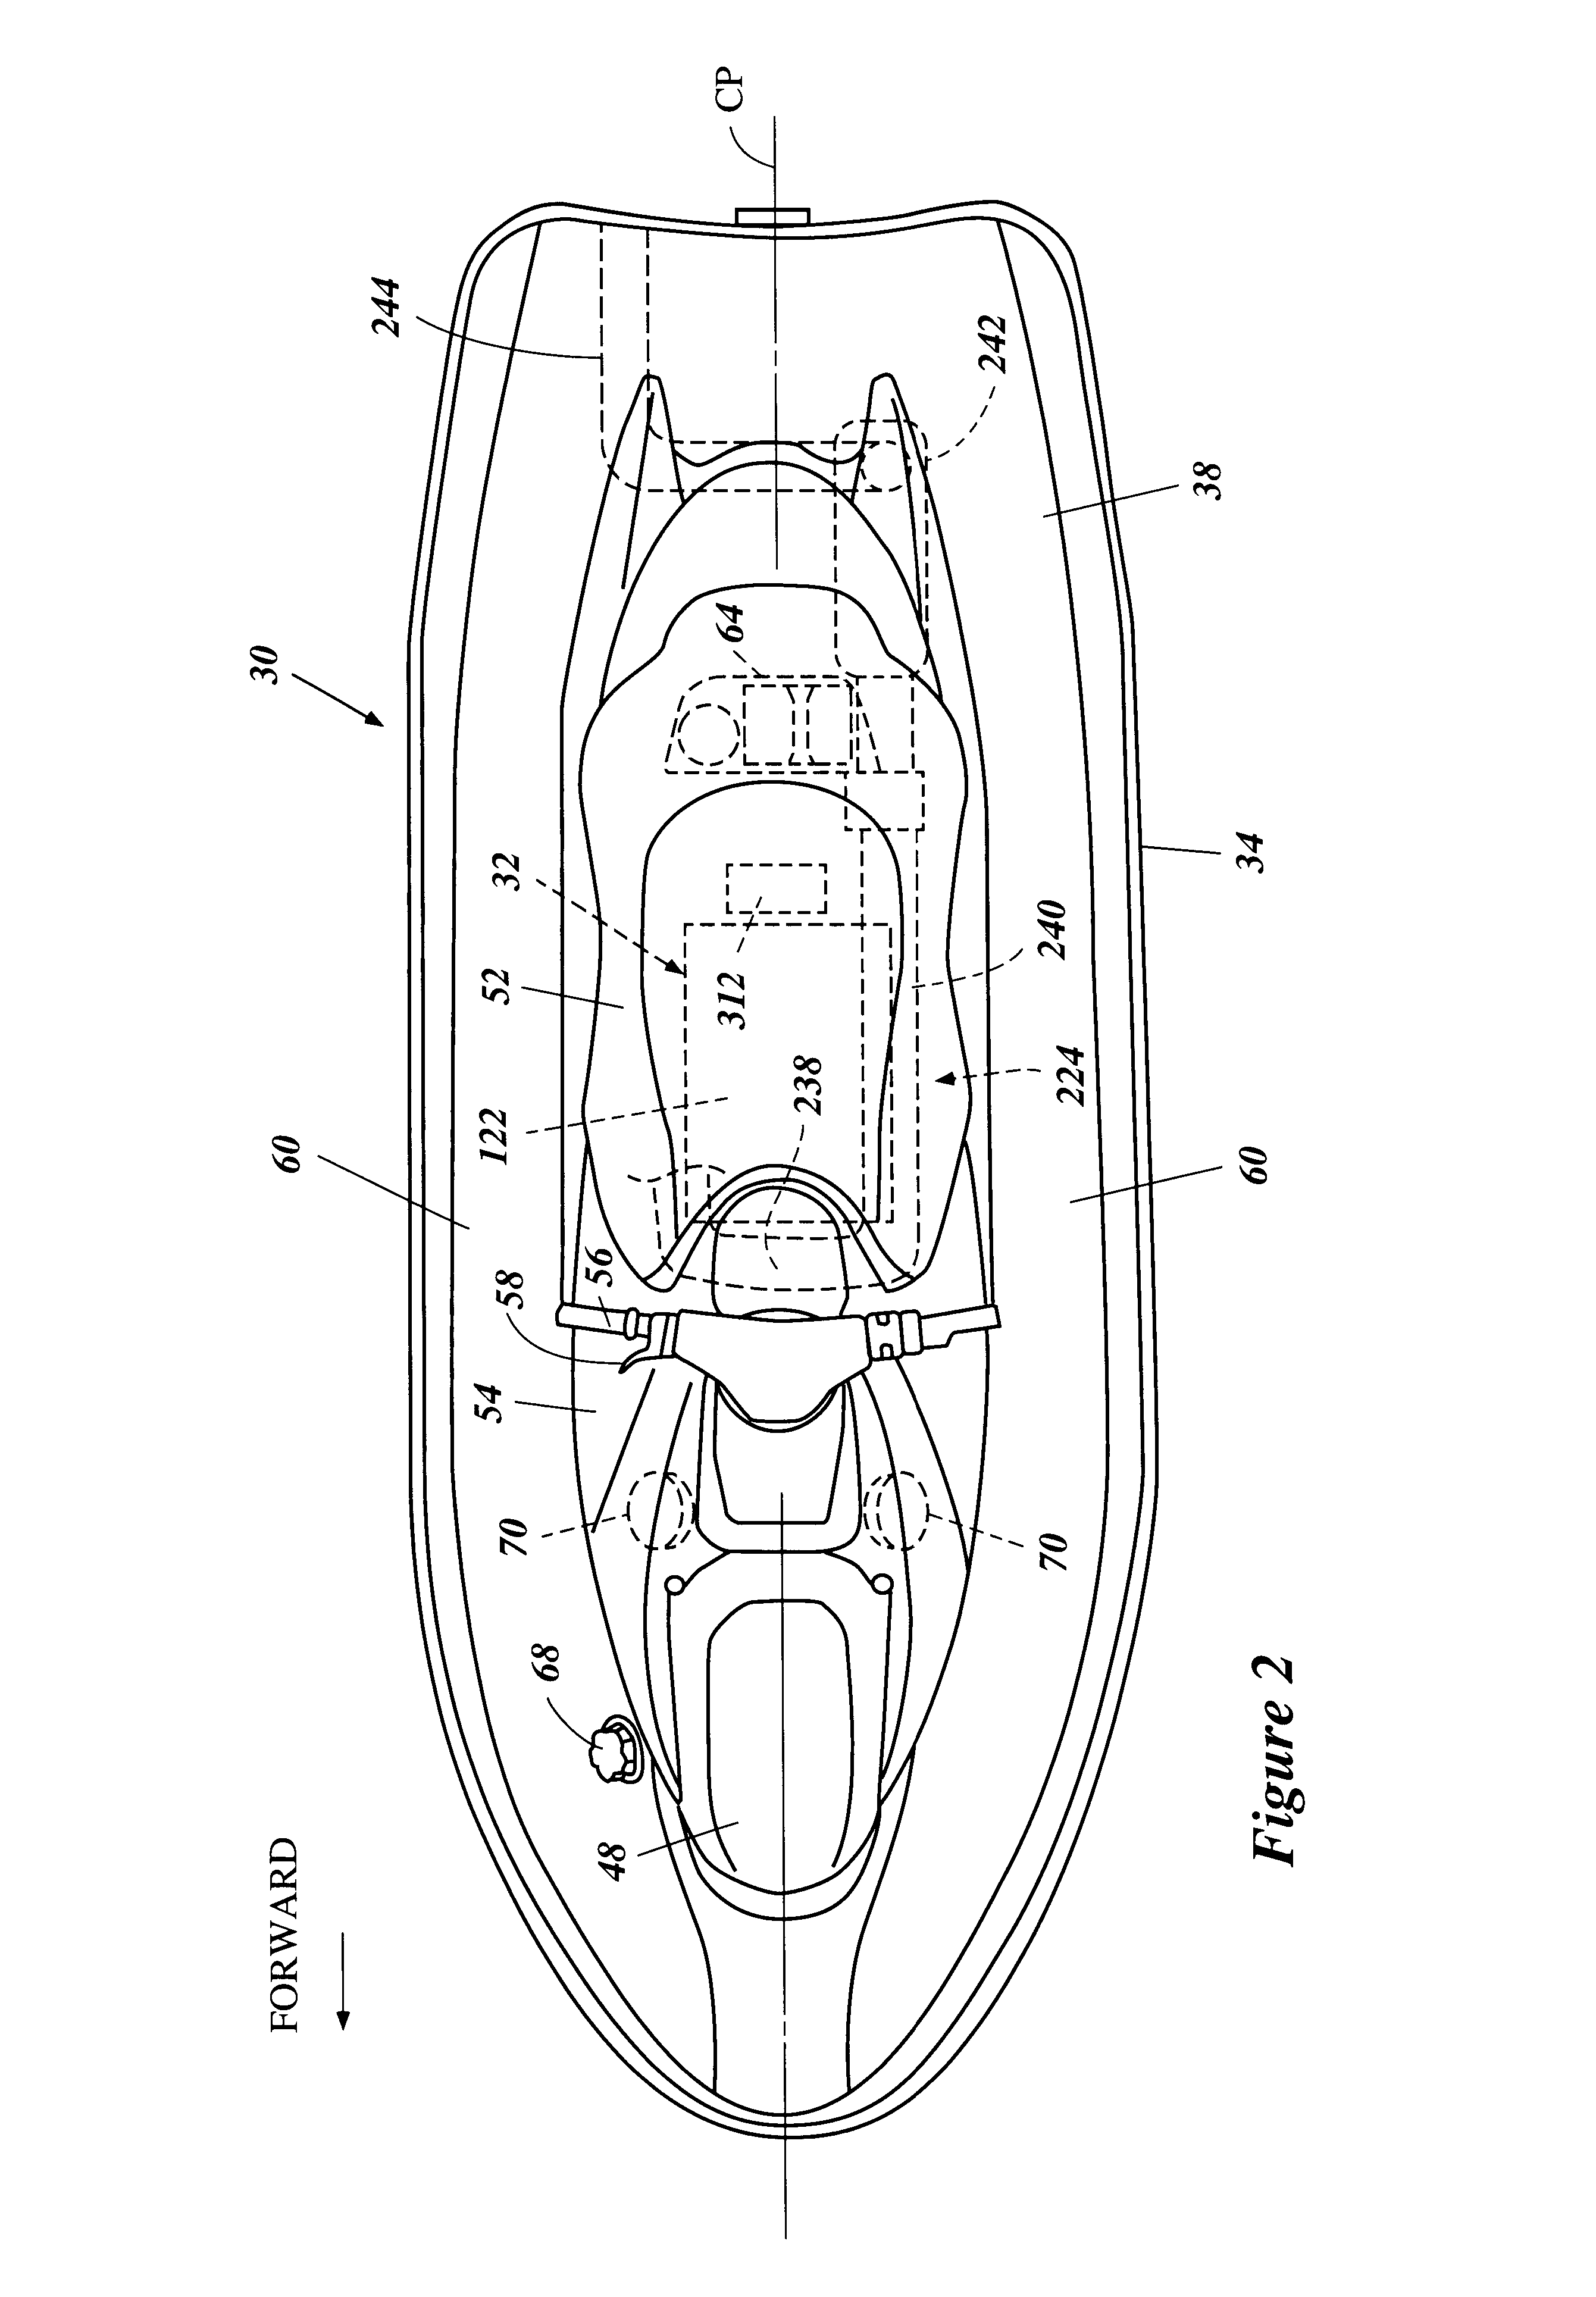 Induction system for 4-cycle engine of small watercraft